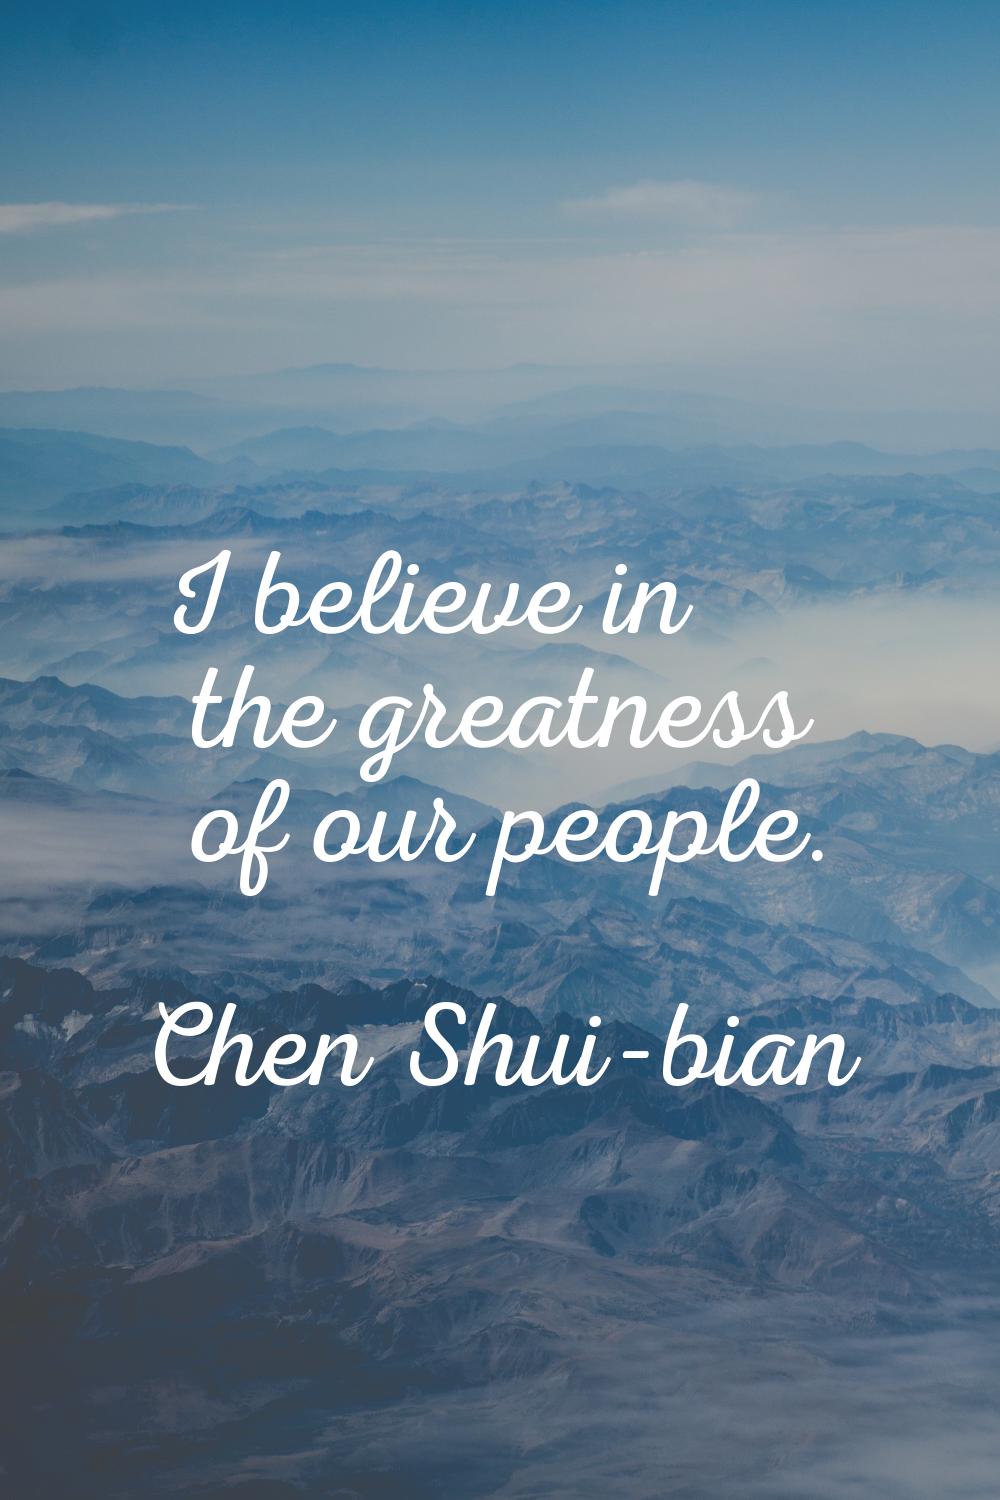 I believe in the greatness of our people.